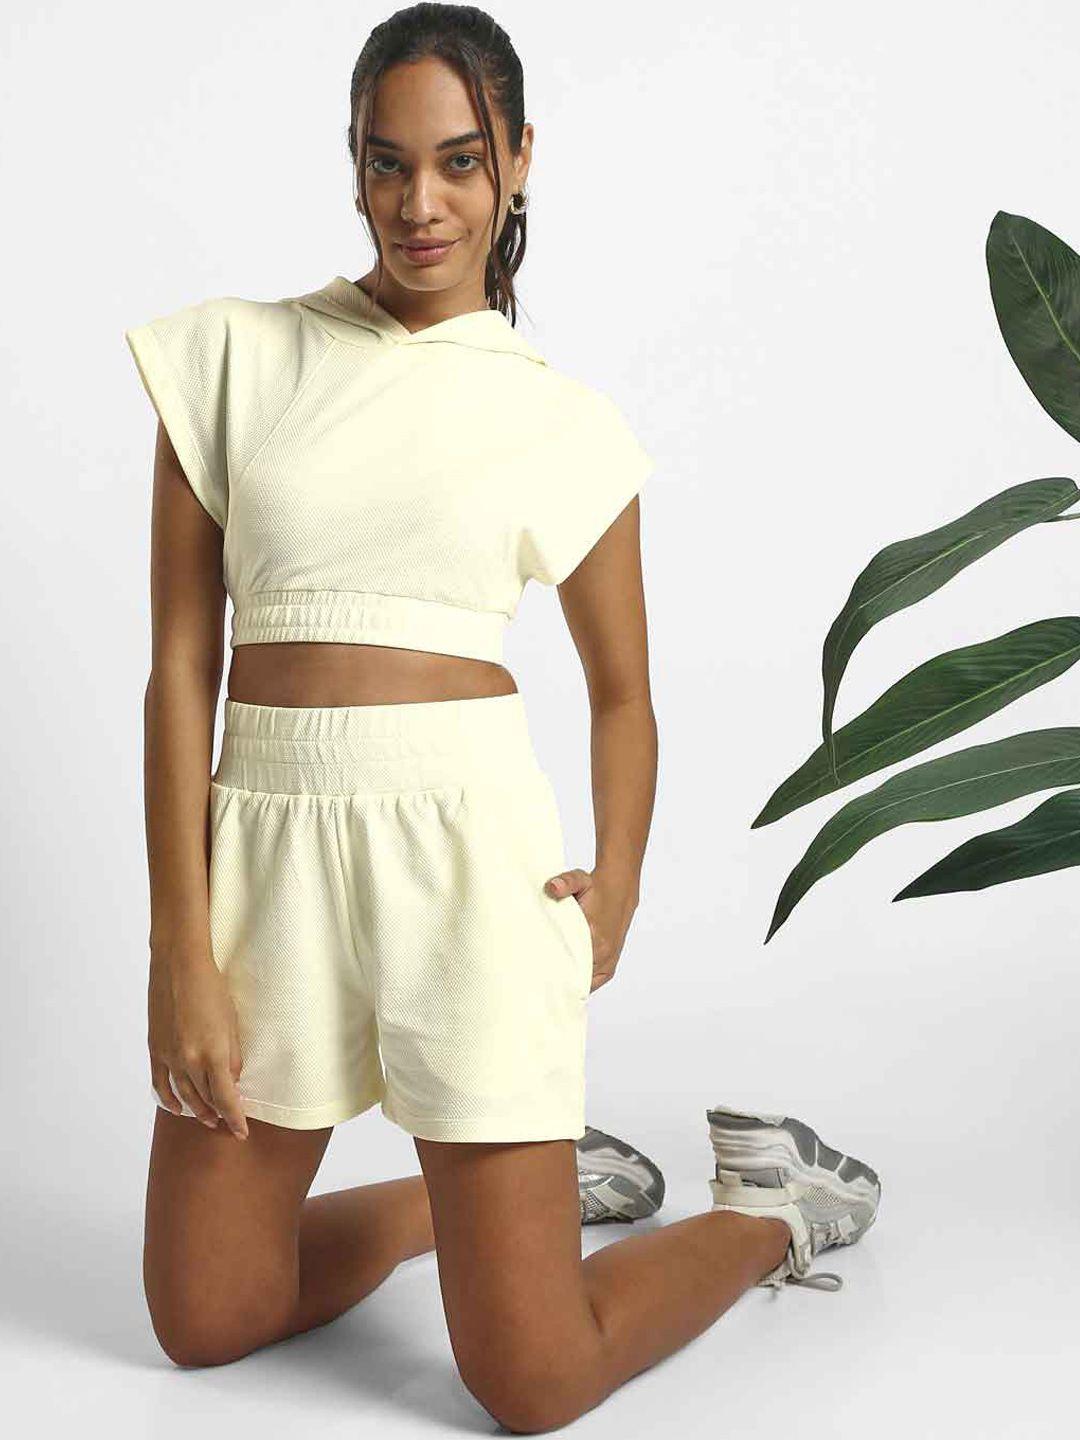 nobero textured crop top with shorts co-ords